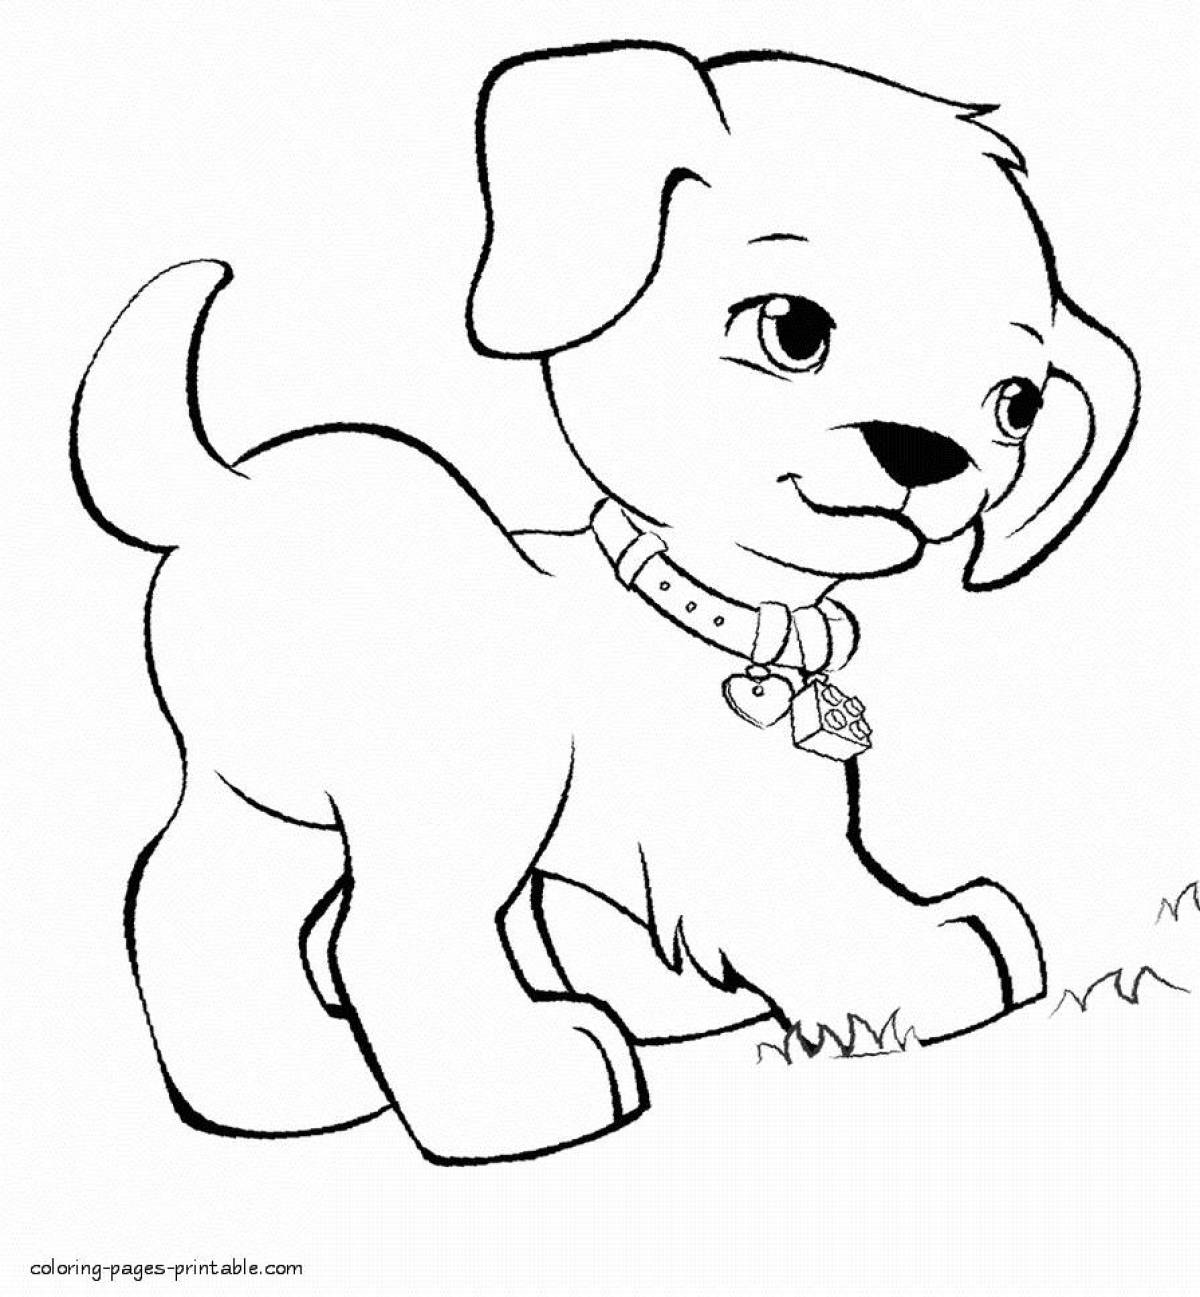 Sweet dog coloring book for kids 6-7 years old